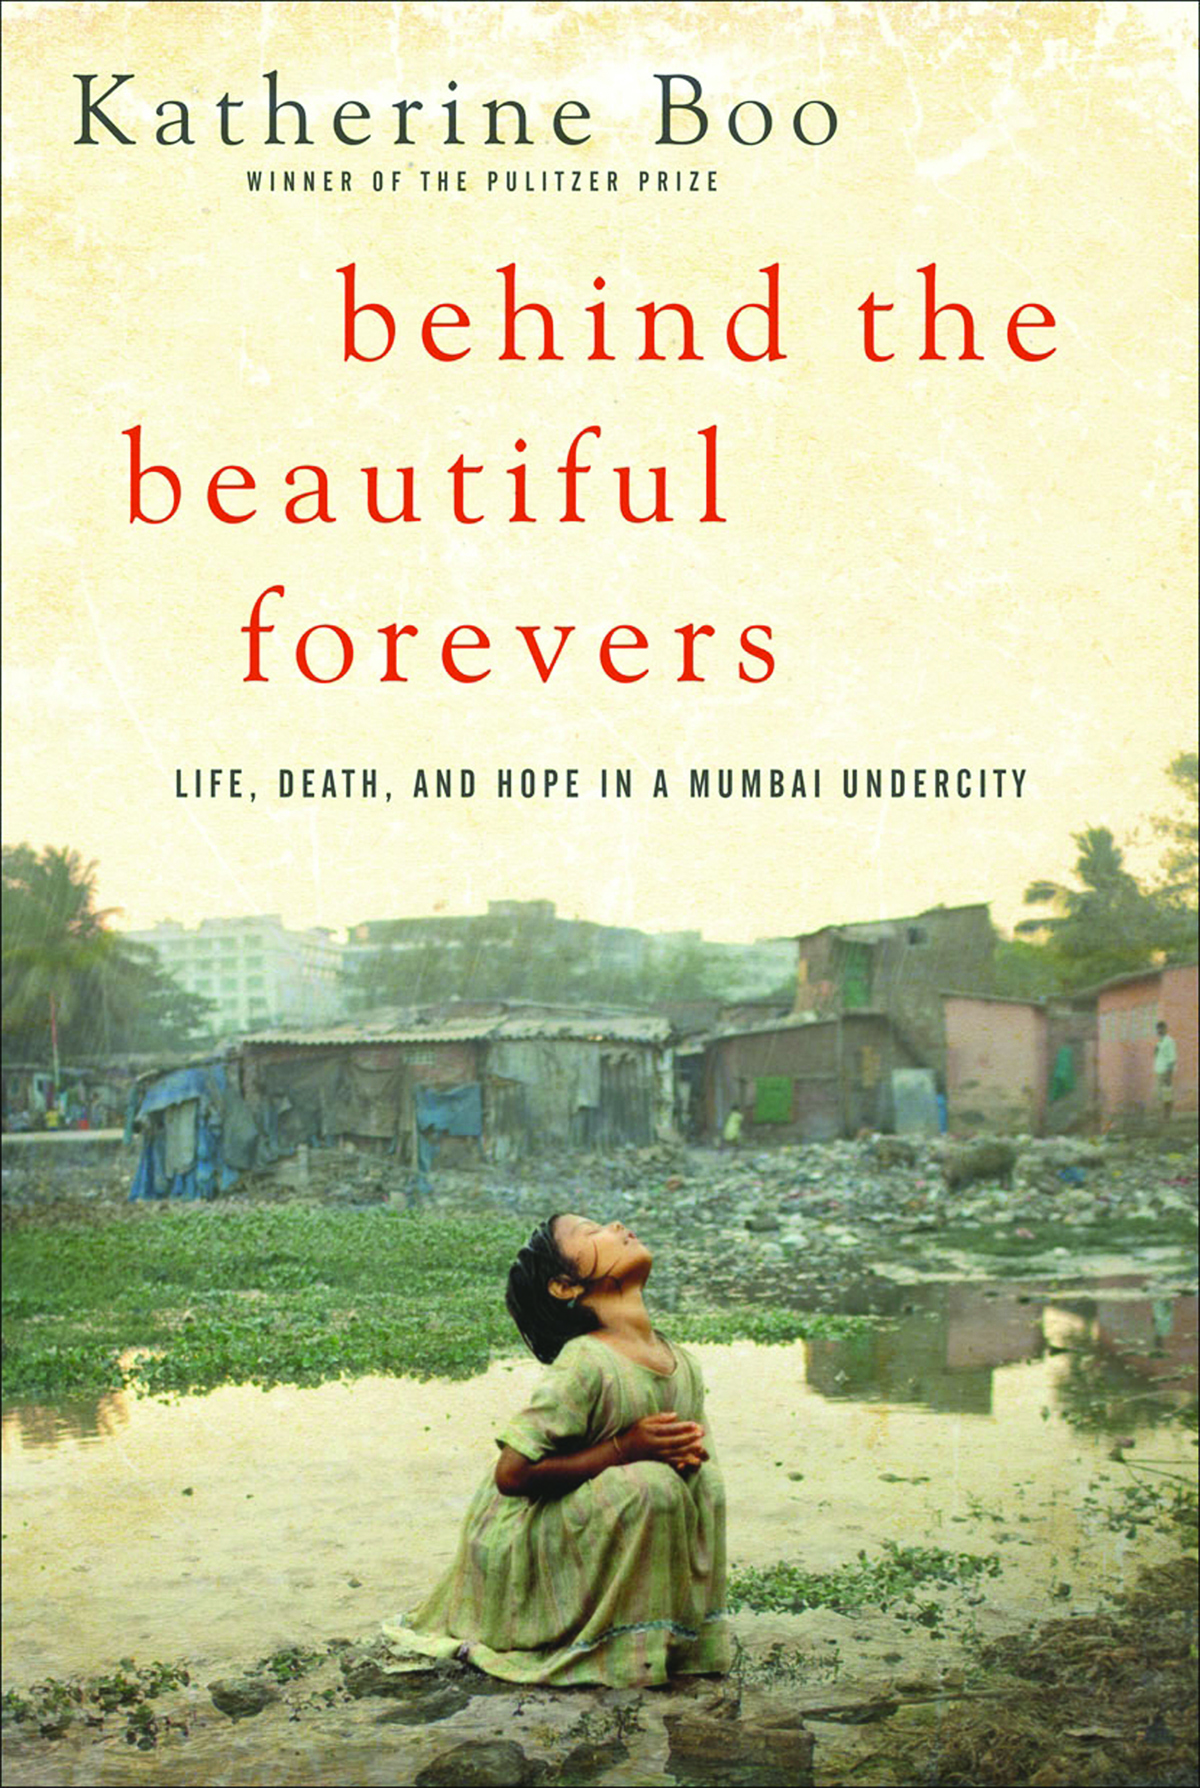 Behind the Beautiful Forevers (2015, Random House Trade Paperbacks)